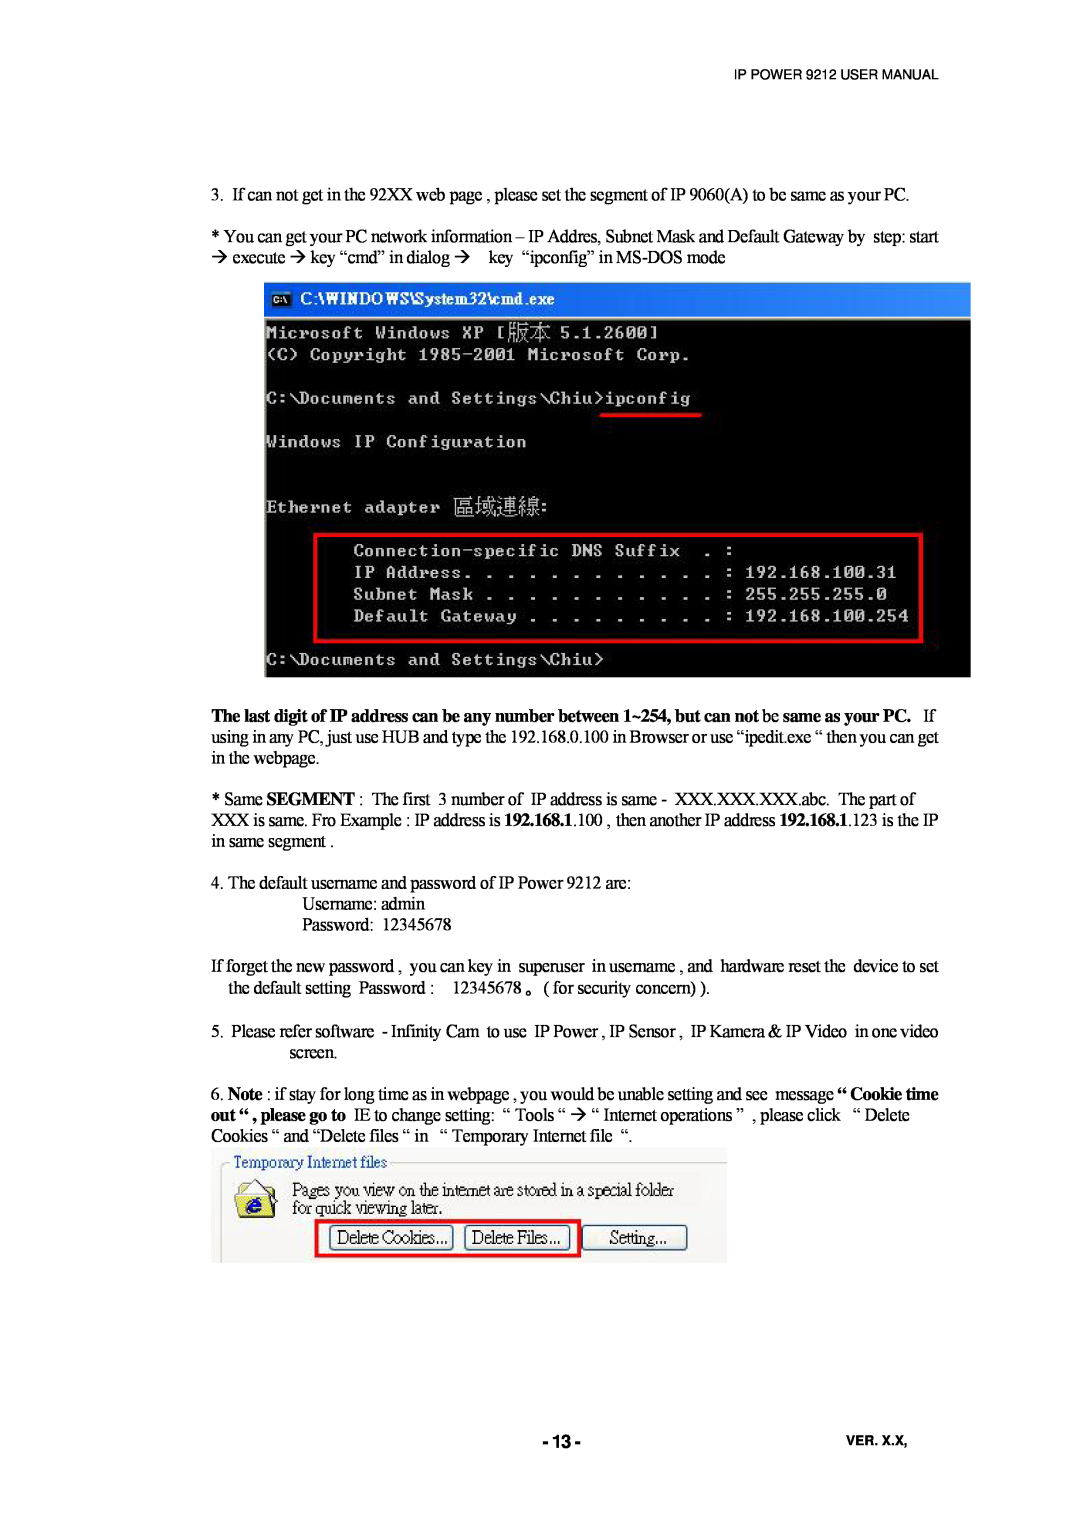 New Media Technology 9212 manual execute key “cmd” in dialog 